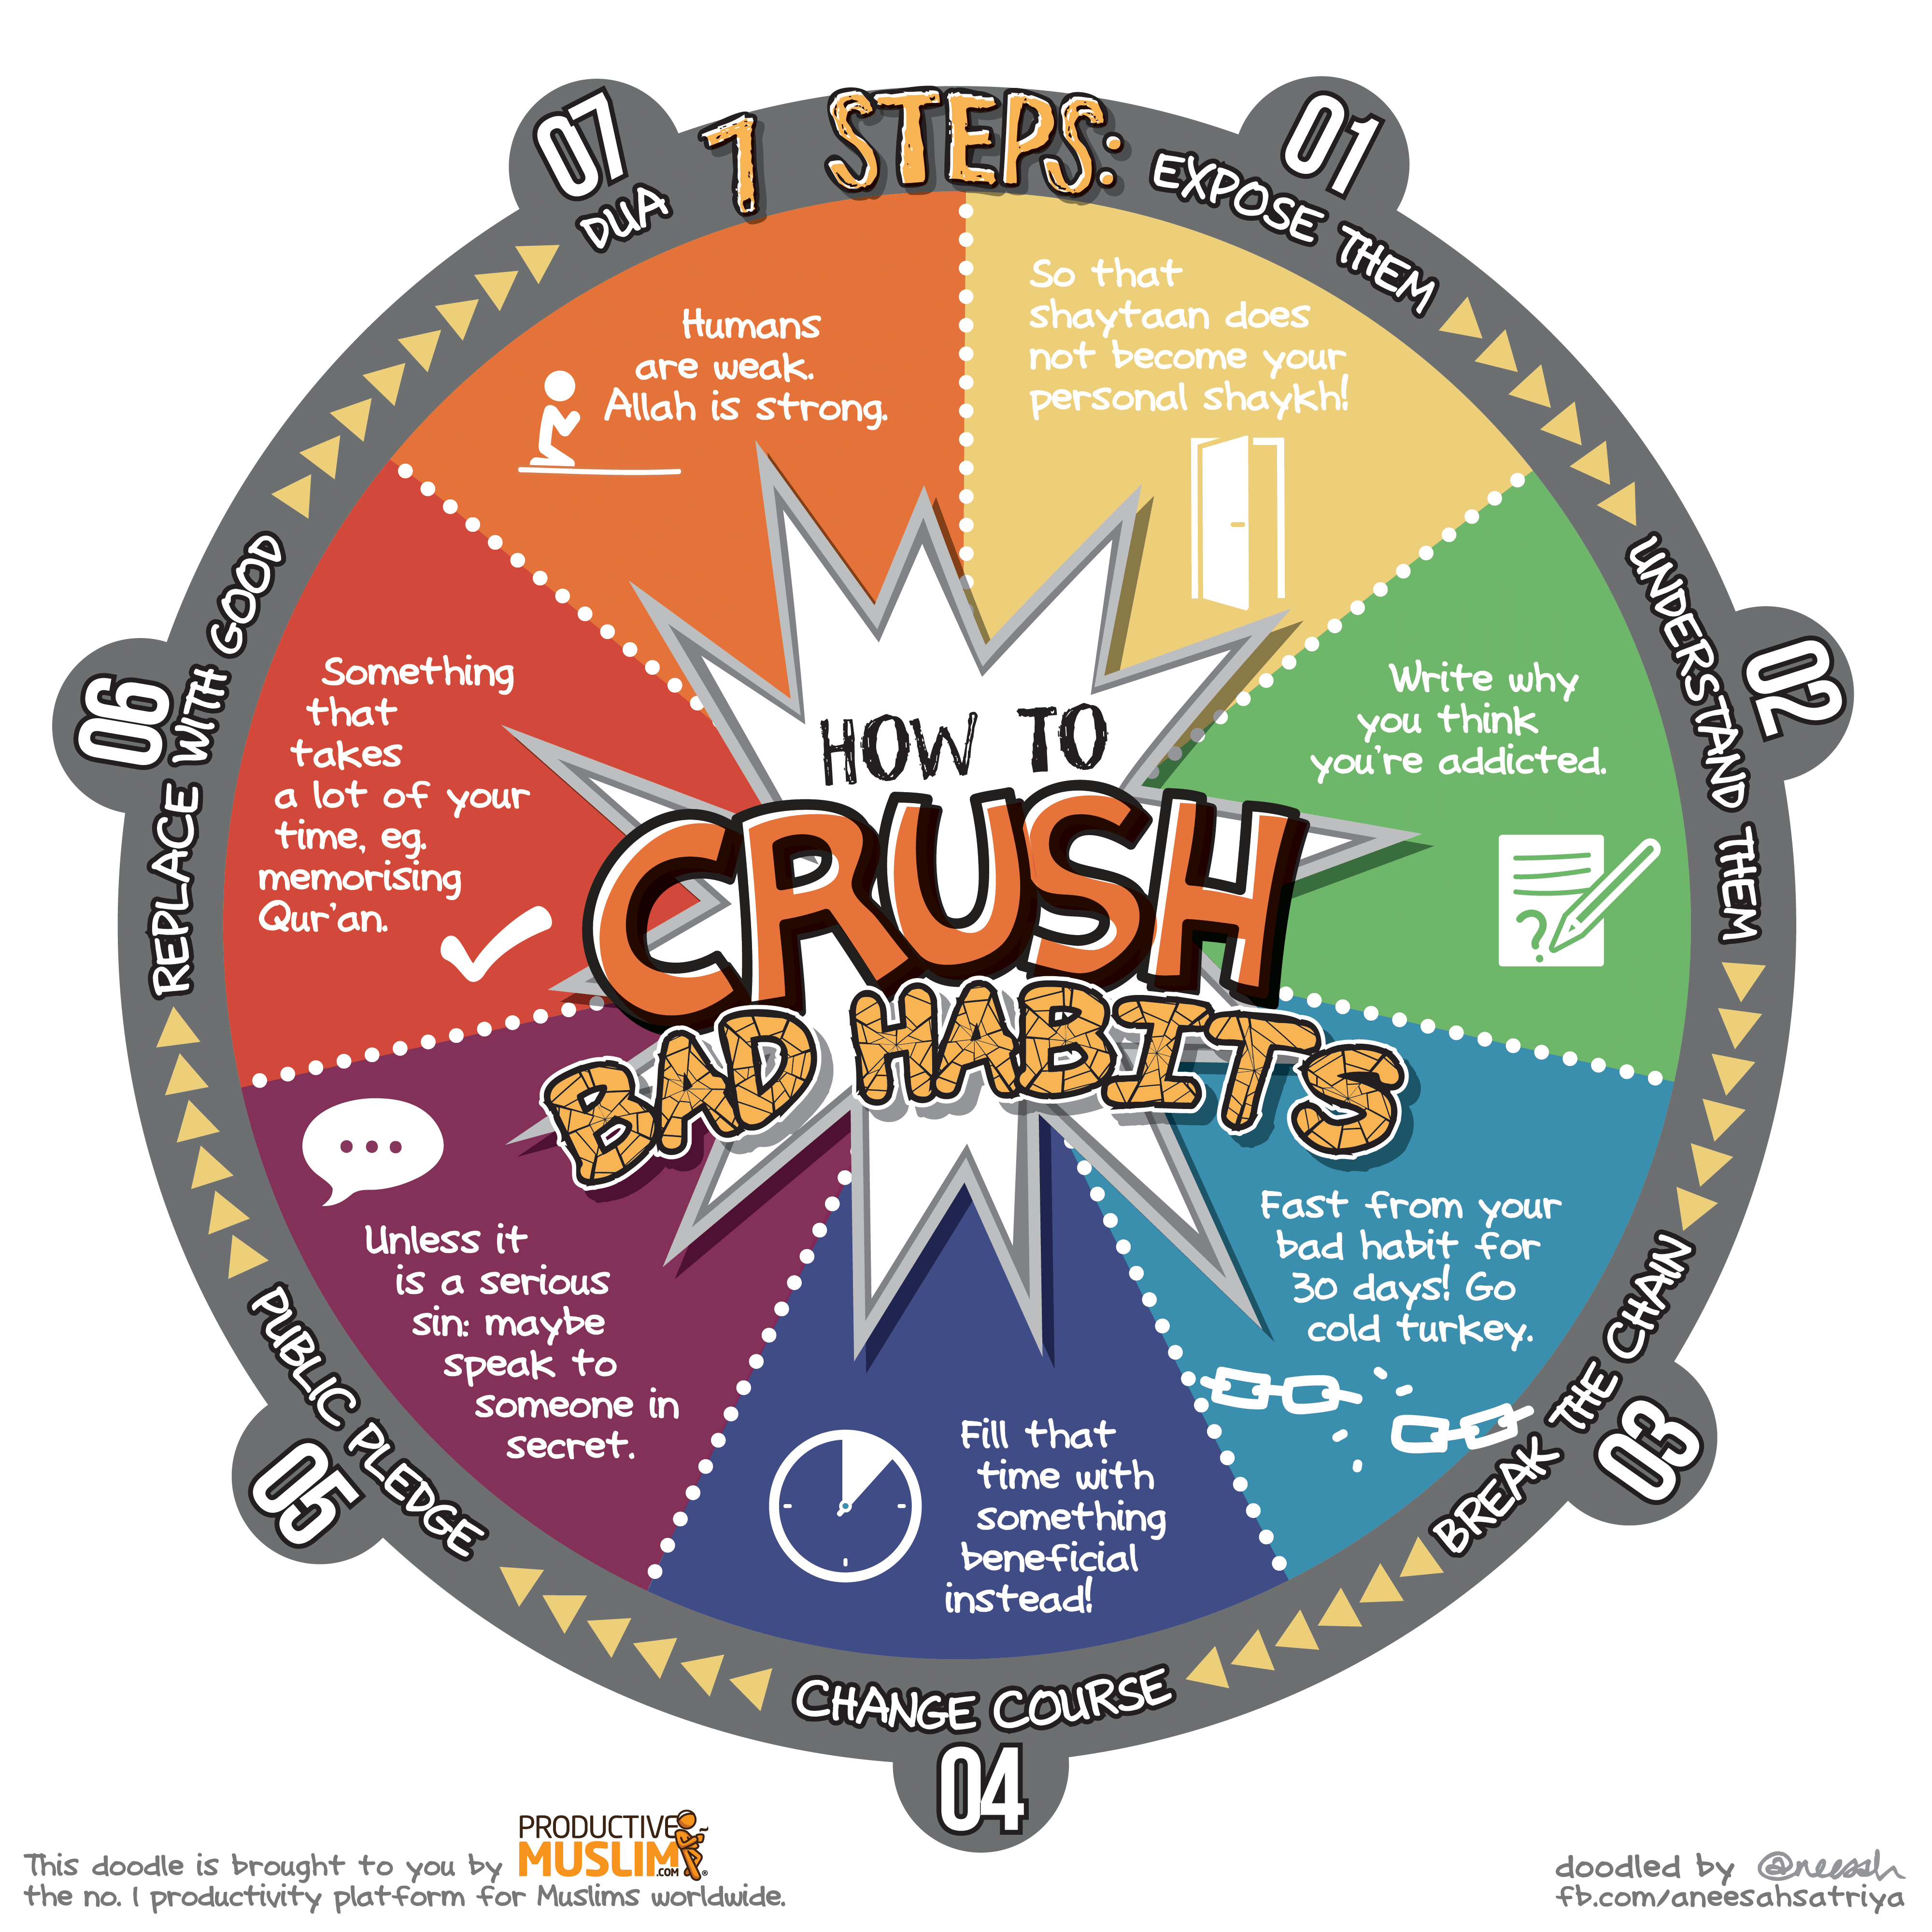 Infographic : How to crush bad habits